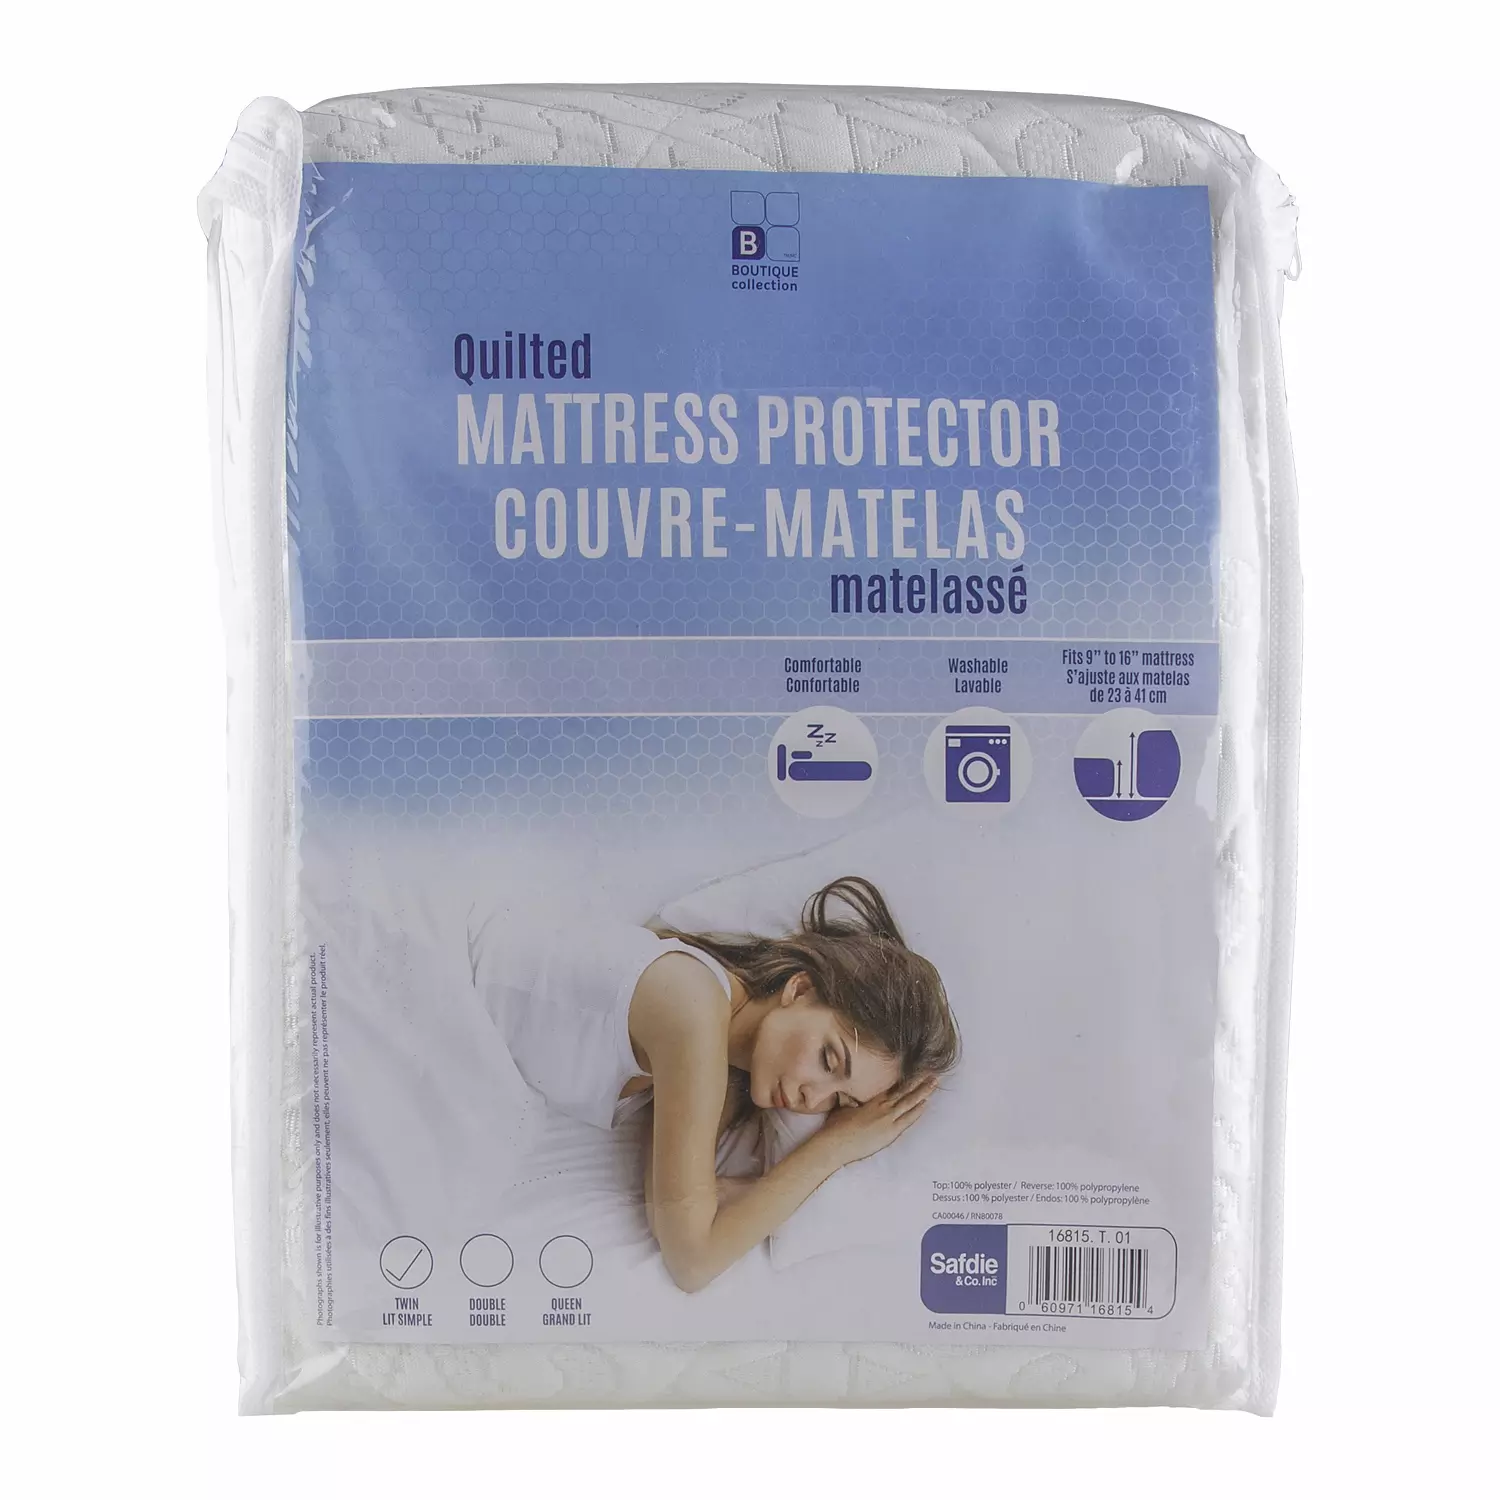 Quilted mattress protector, twin